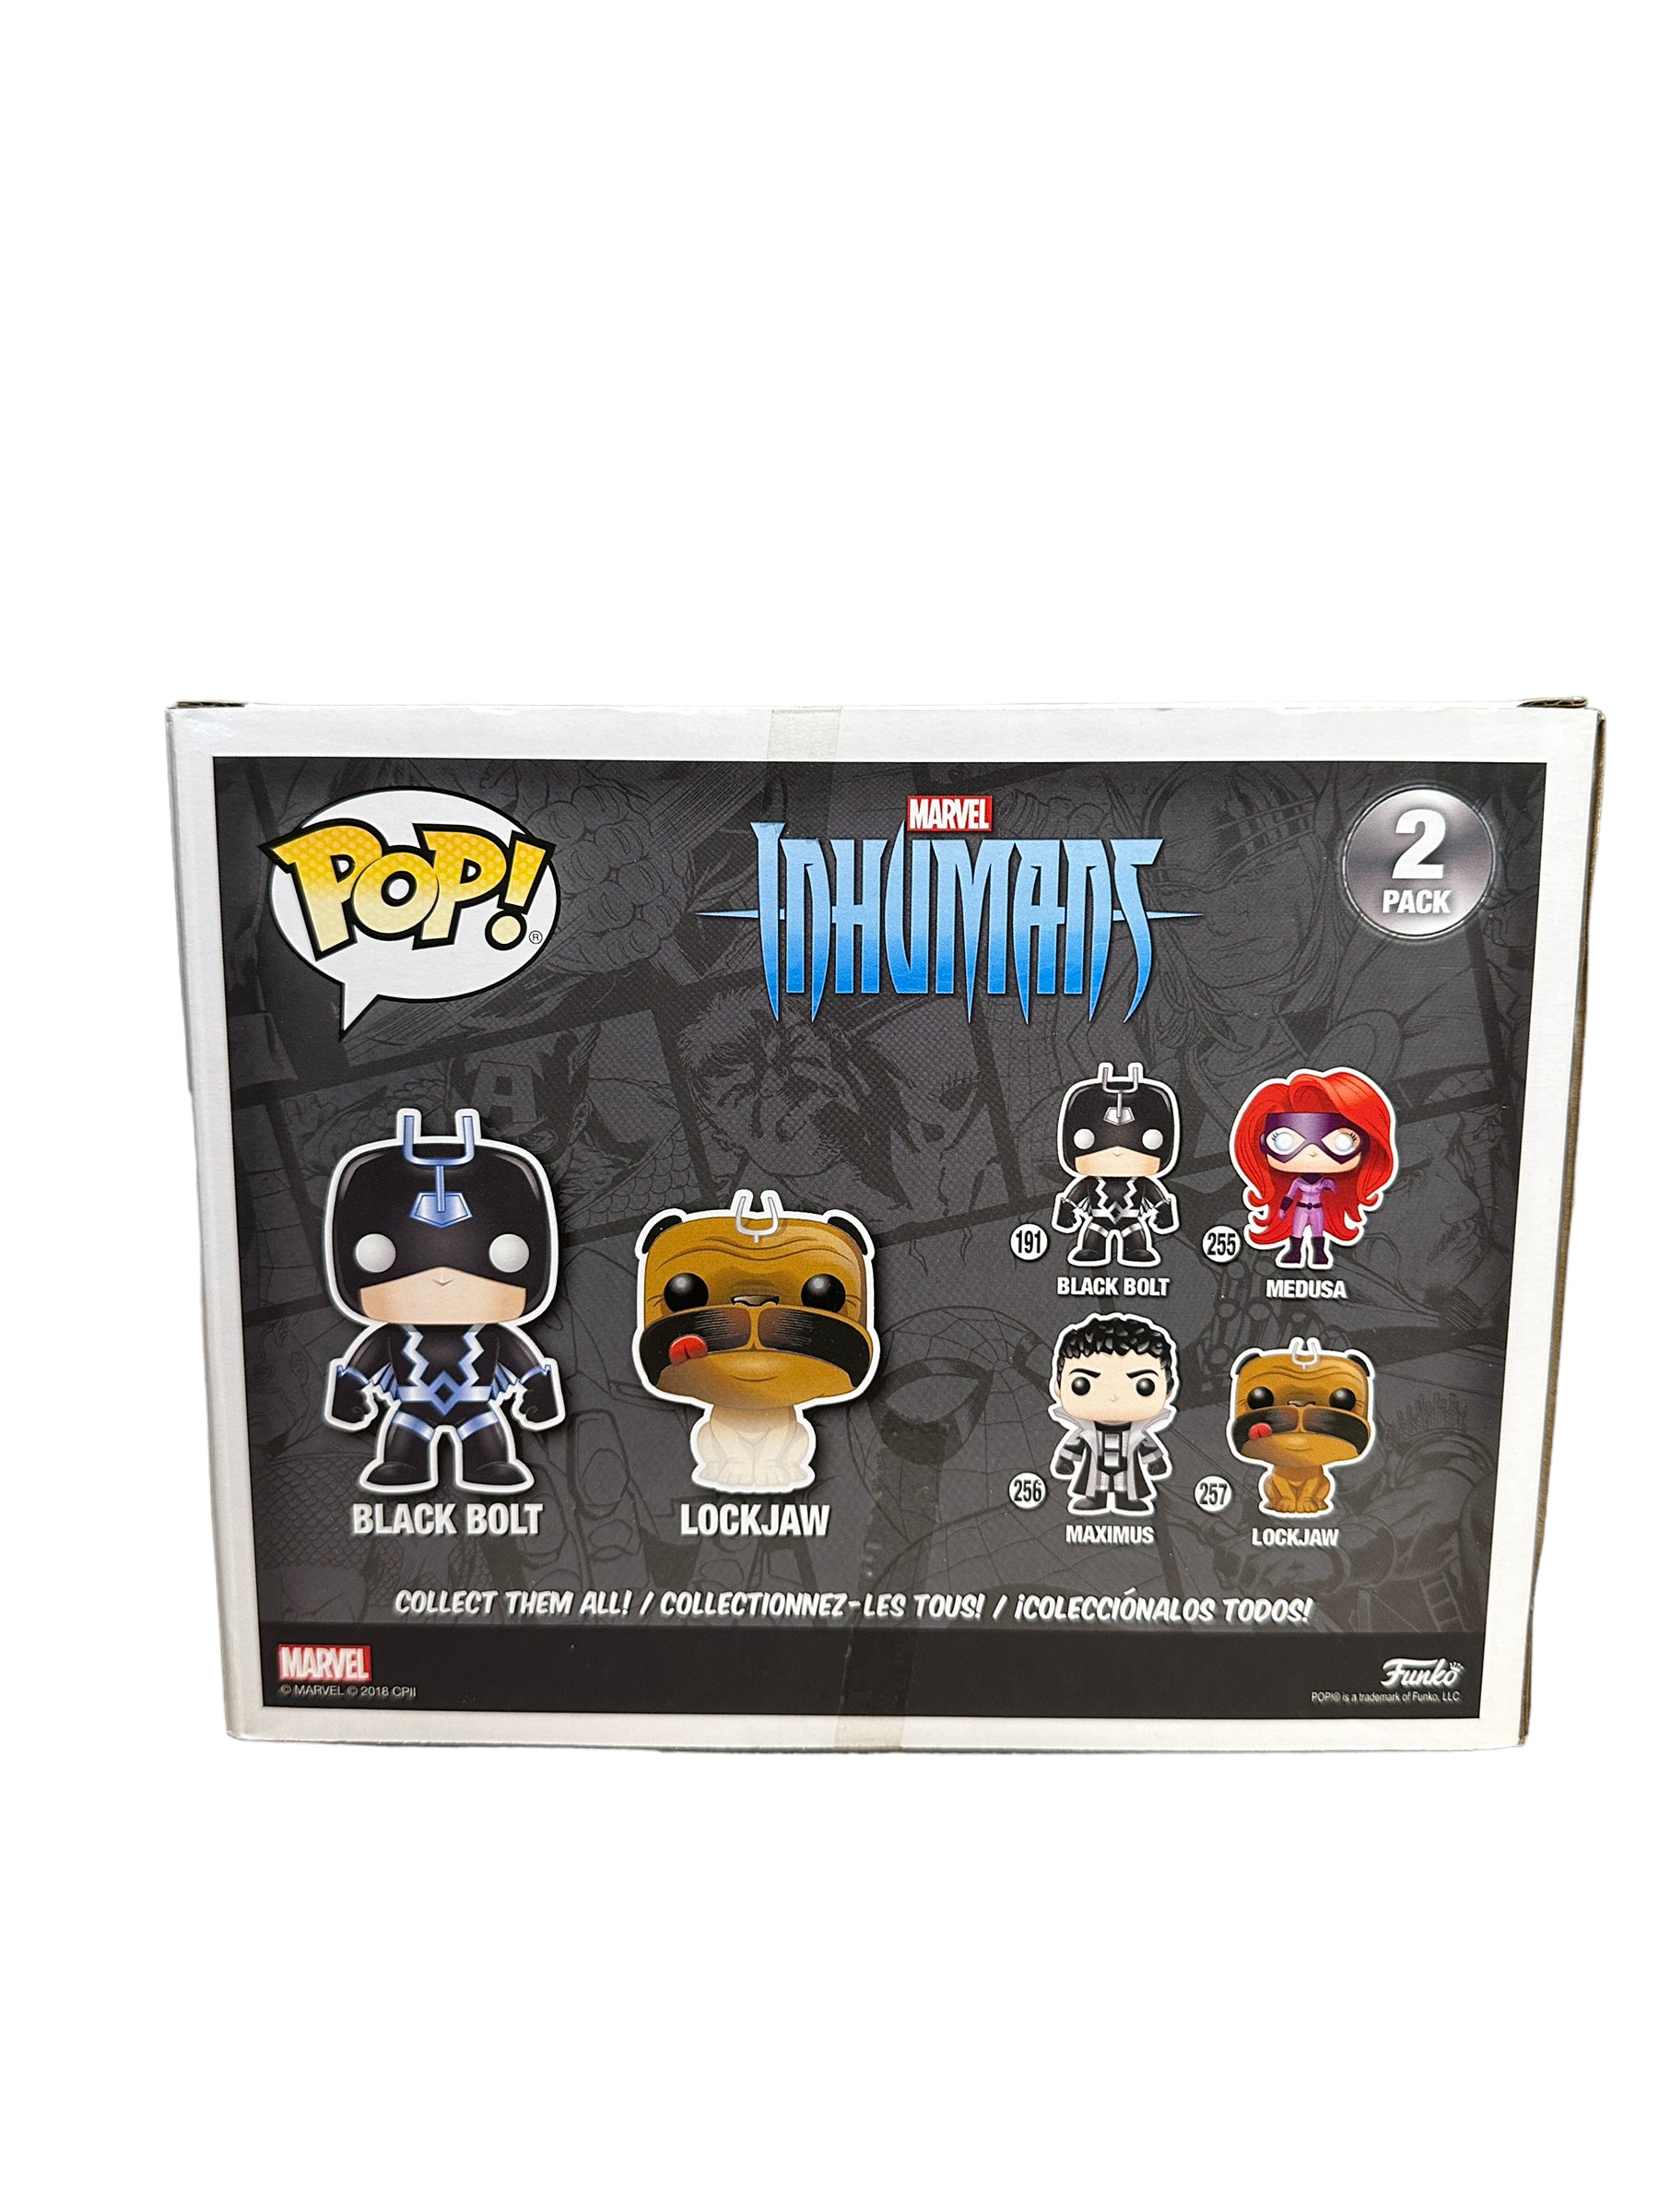 Black Bolt & Lockjaw (Glows in the Dark) 2 Pack Funko Pop! - Marvel - SDCC 2018 Official Convention / PX Previews Exclusive - Condition 8.75/10